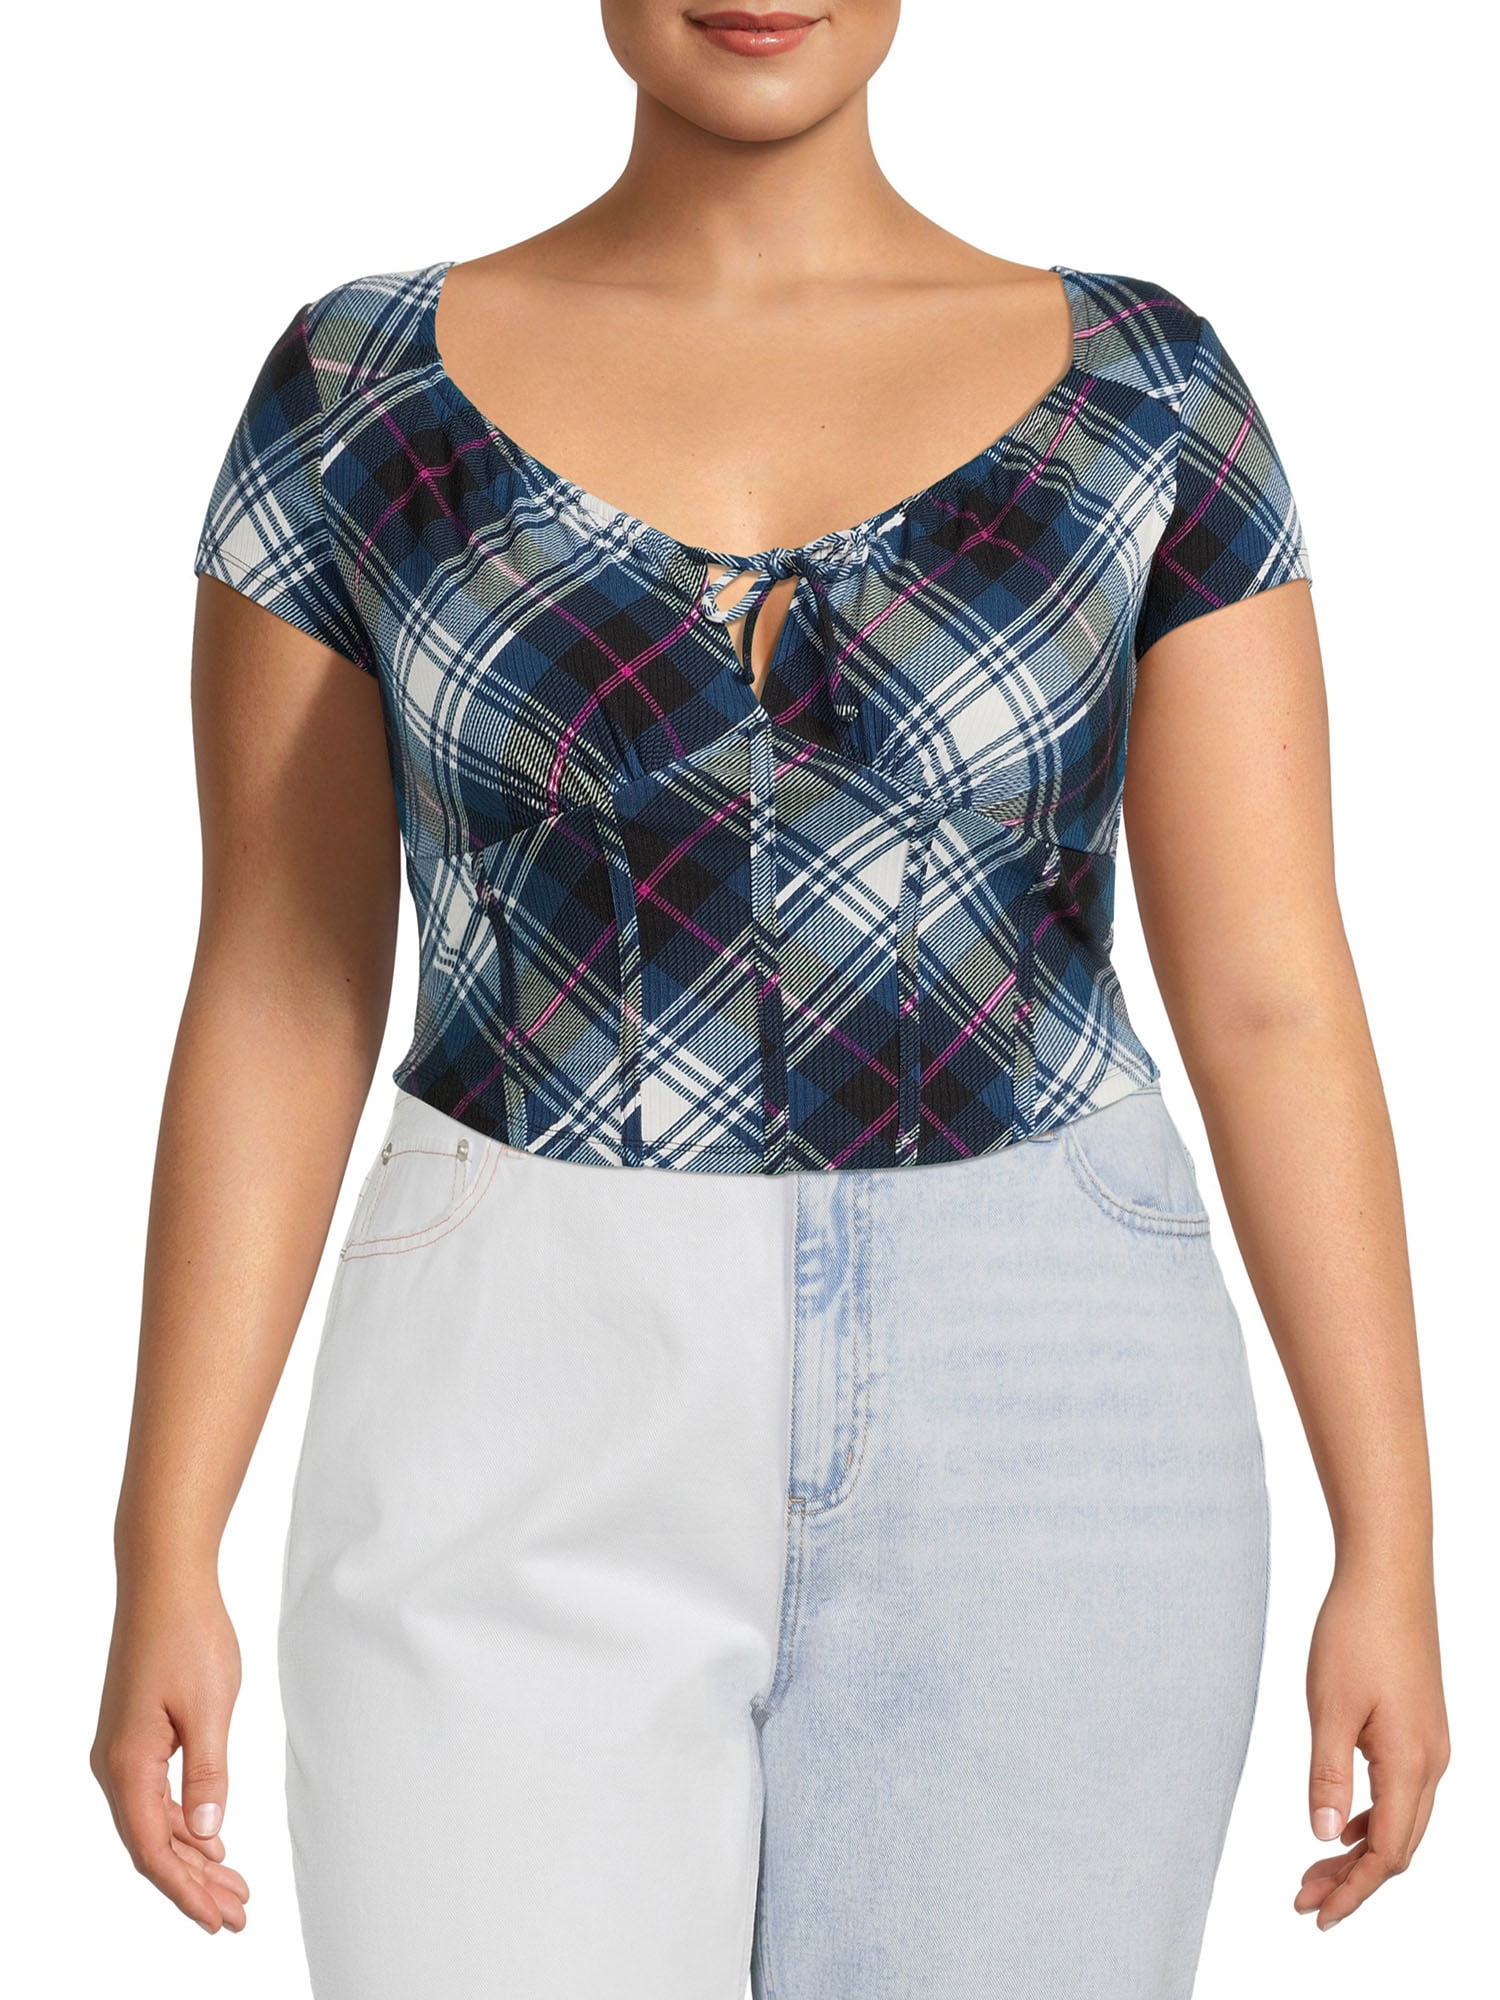 Madden NYC Women's Plus Size Corset Top